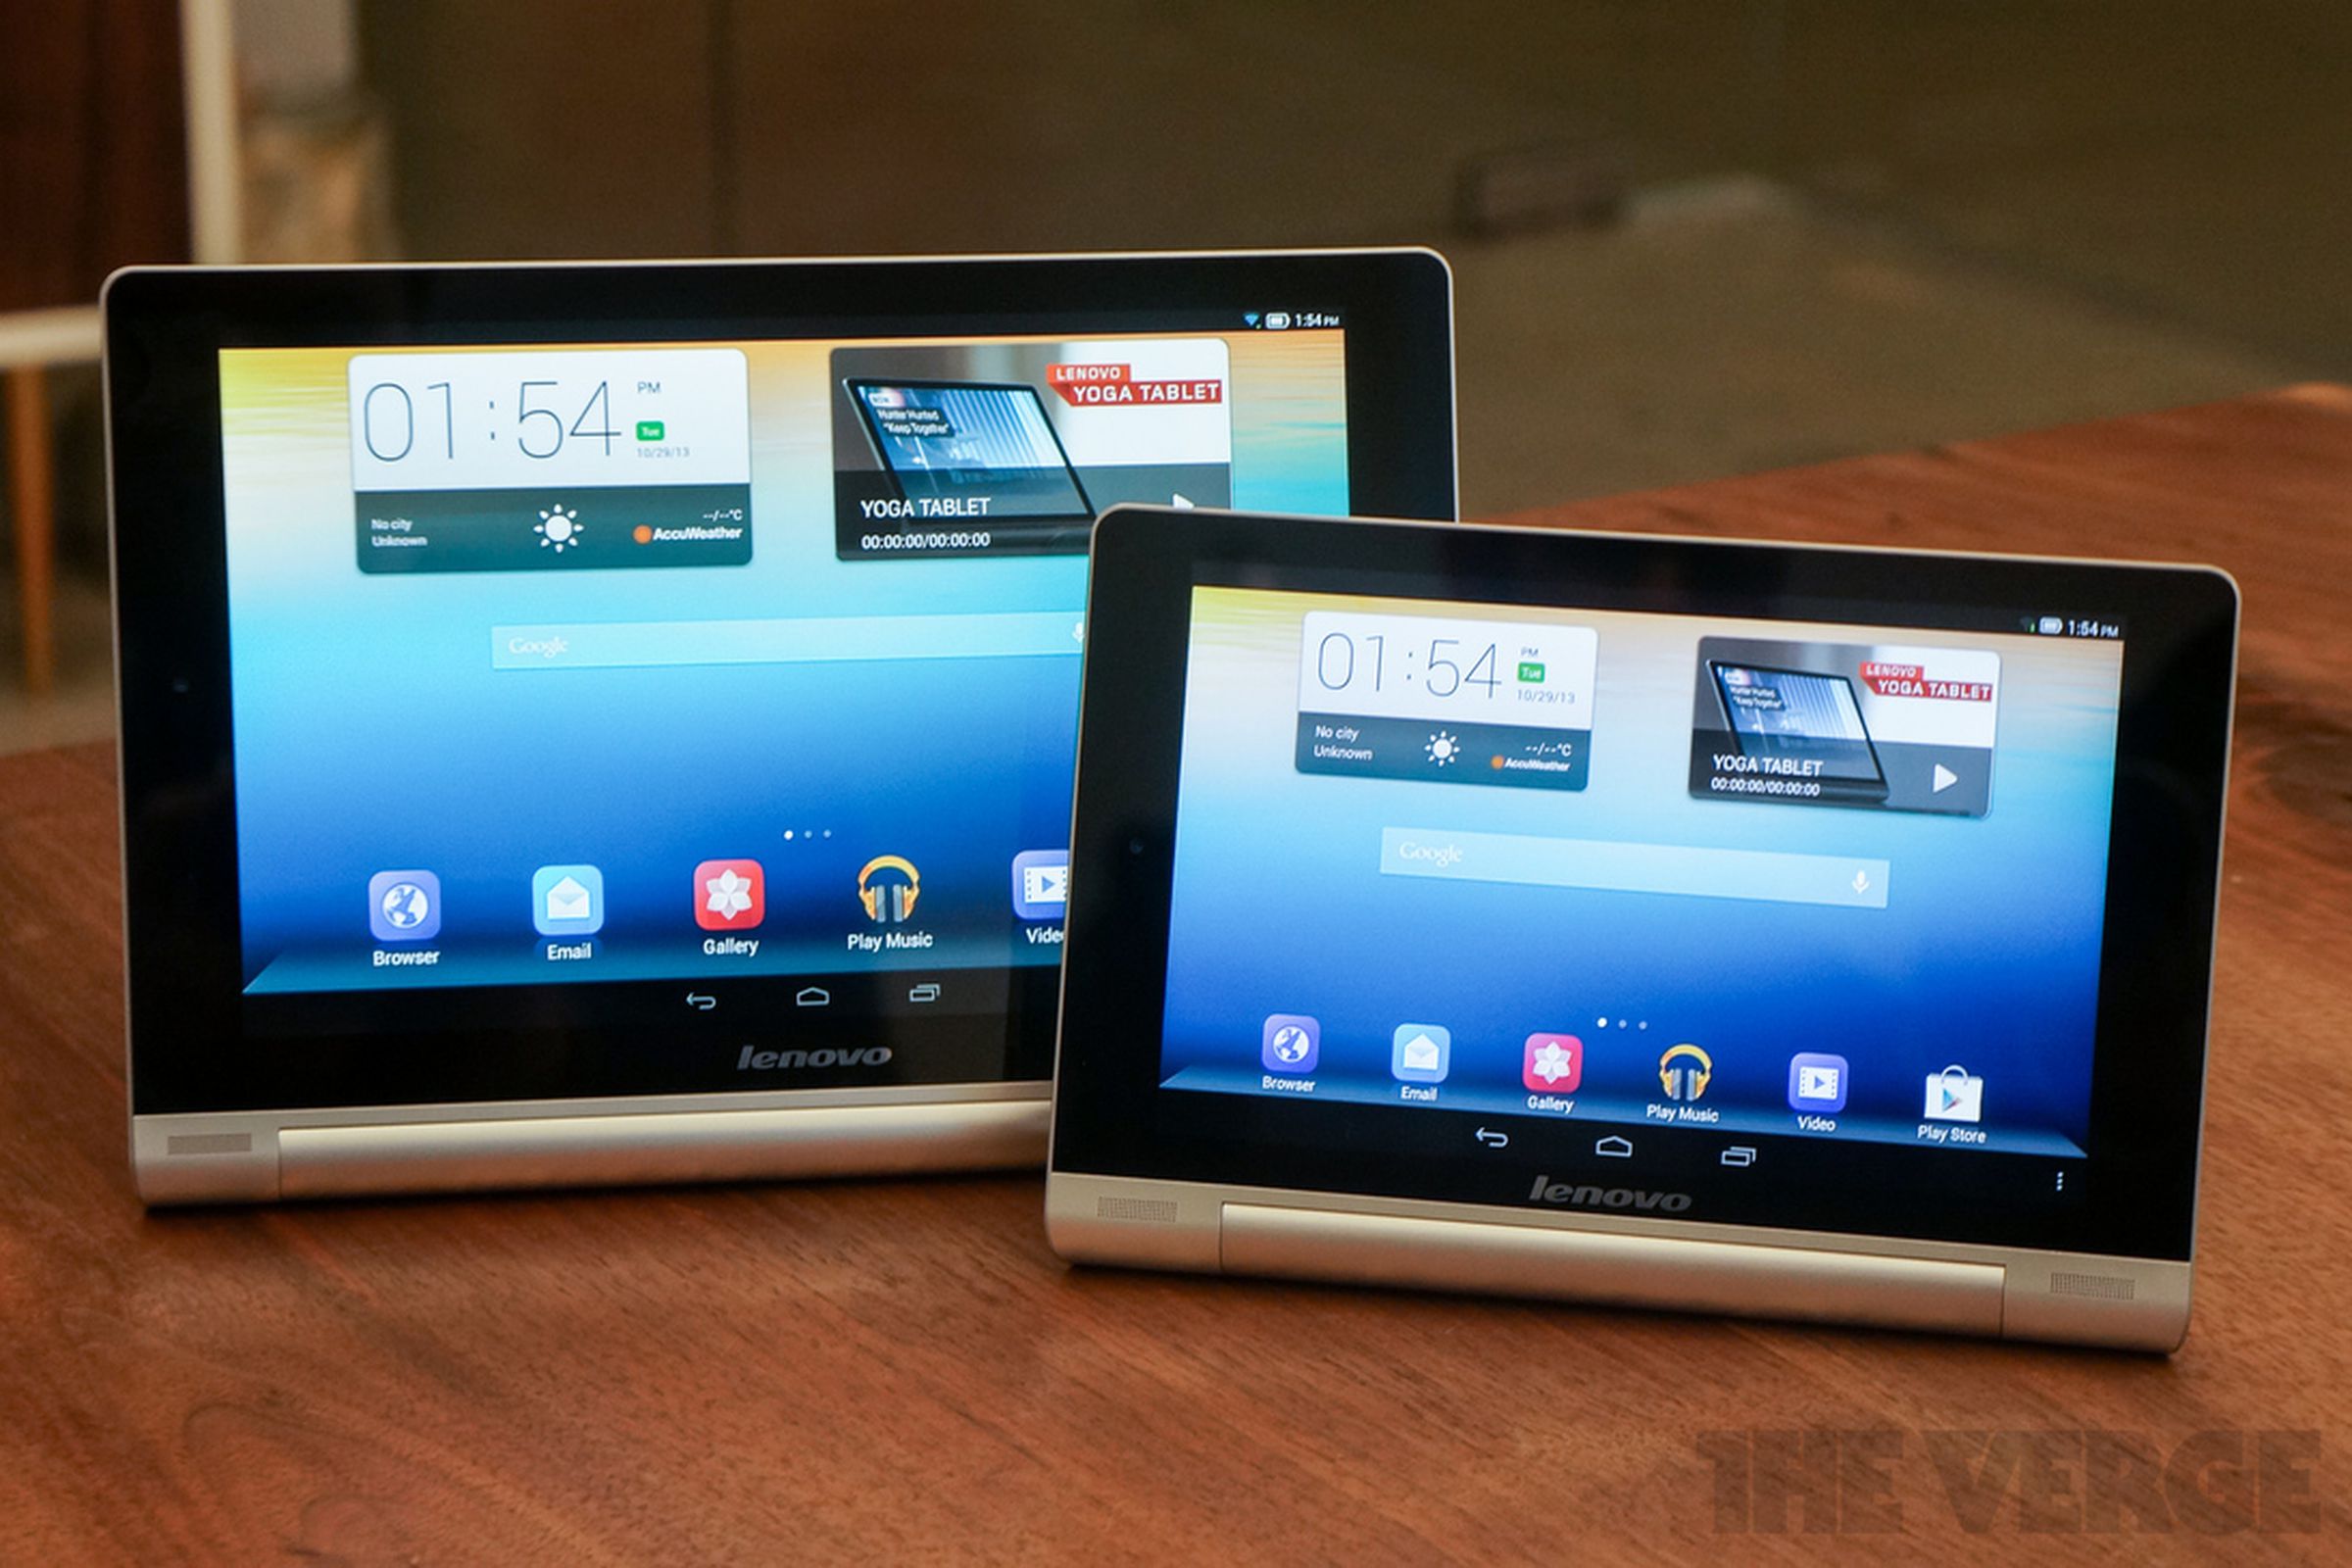 Gallery Photo: Lenovo Yoga Tablet hands-on